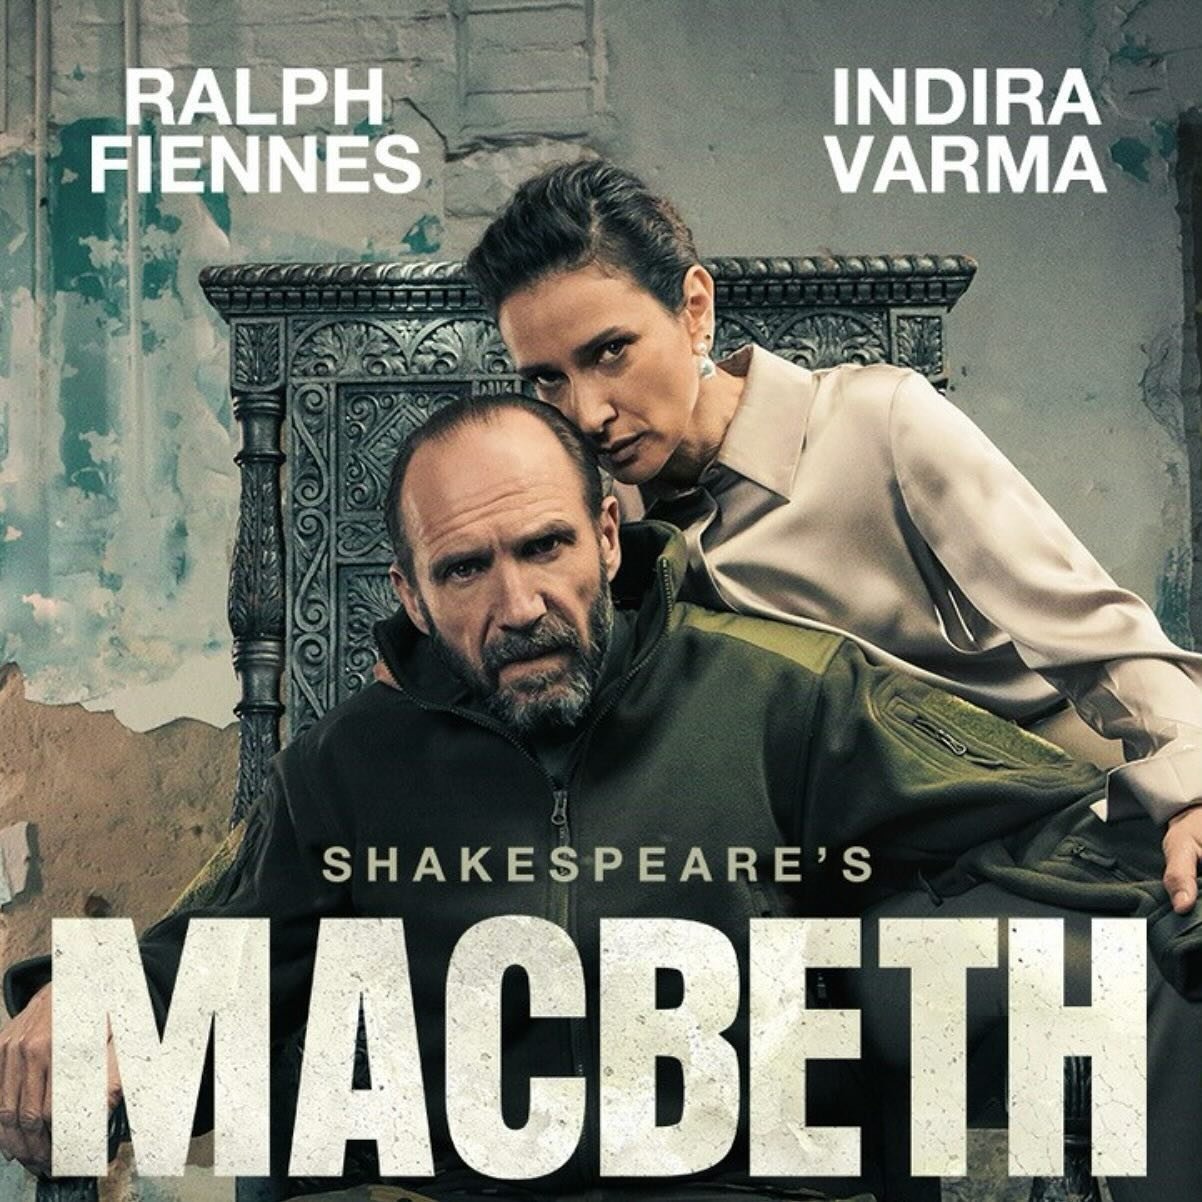 Here&rsquo;s your PSA for May! (thats Public Shakespeare Announcement)

Not able to get tickets for Macbeth with Ralph Fiennes and Indira Varma in DC or anywhere else? 

You&rsquo;re in (major) luck - there are two opportunities to see this productio